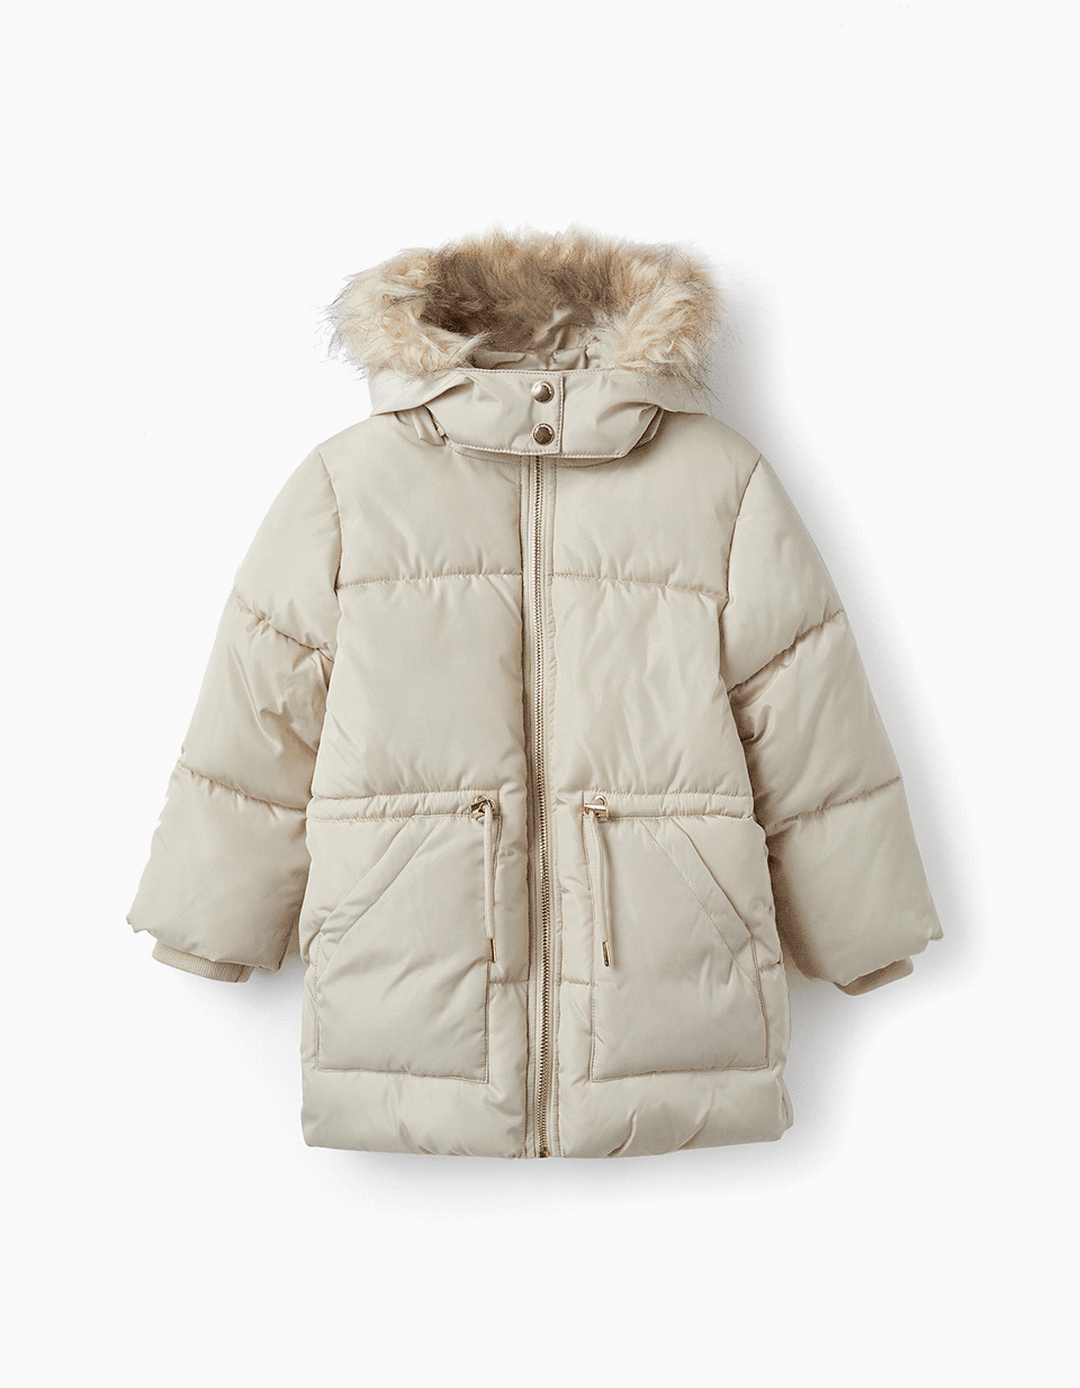 Padded Hooded Jacket with Fur for Girls, Beige